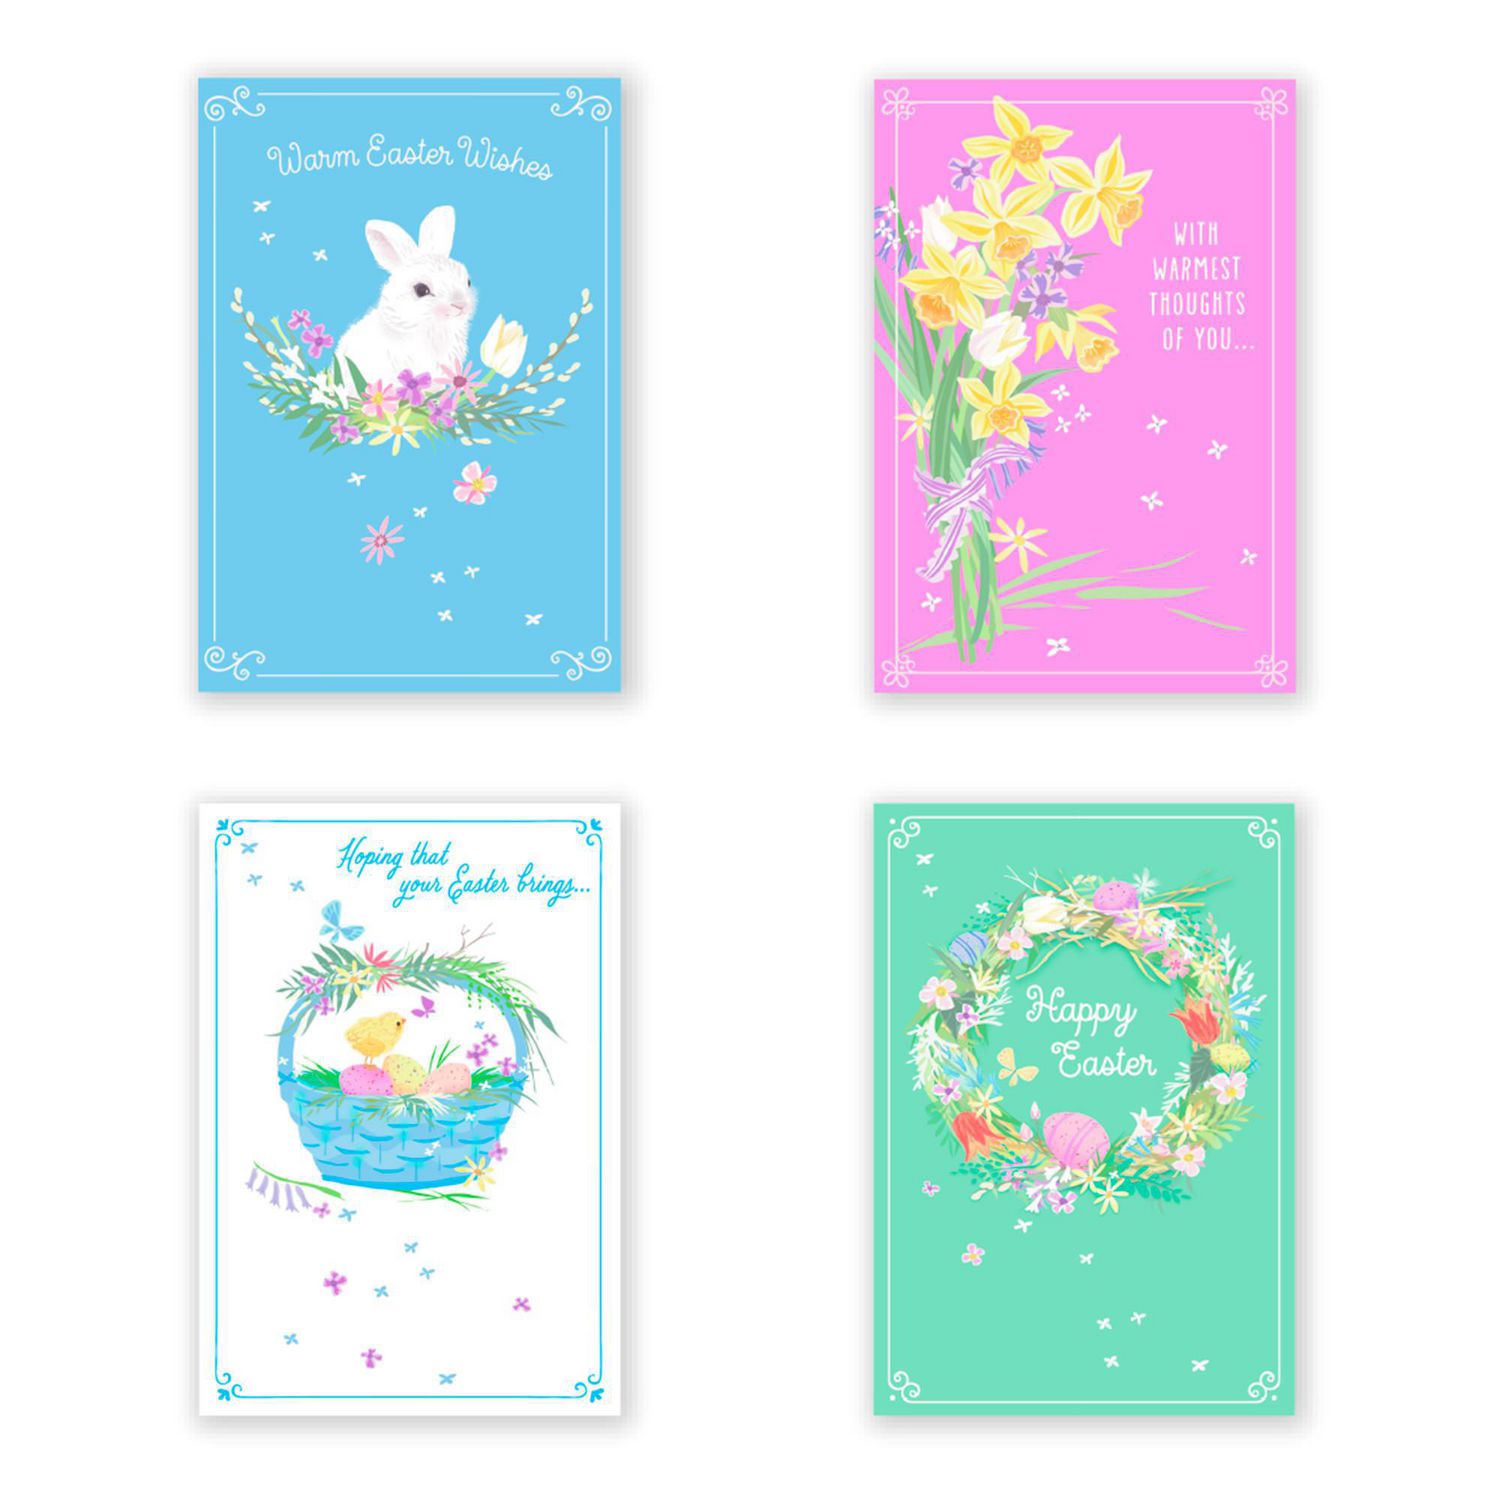 Hallmark Easter Cards Assortment, Warm Easter Wishes (8 Cards with